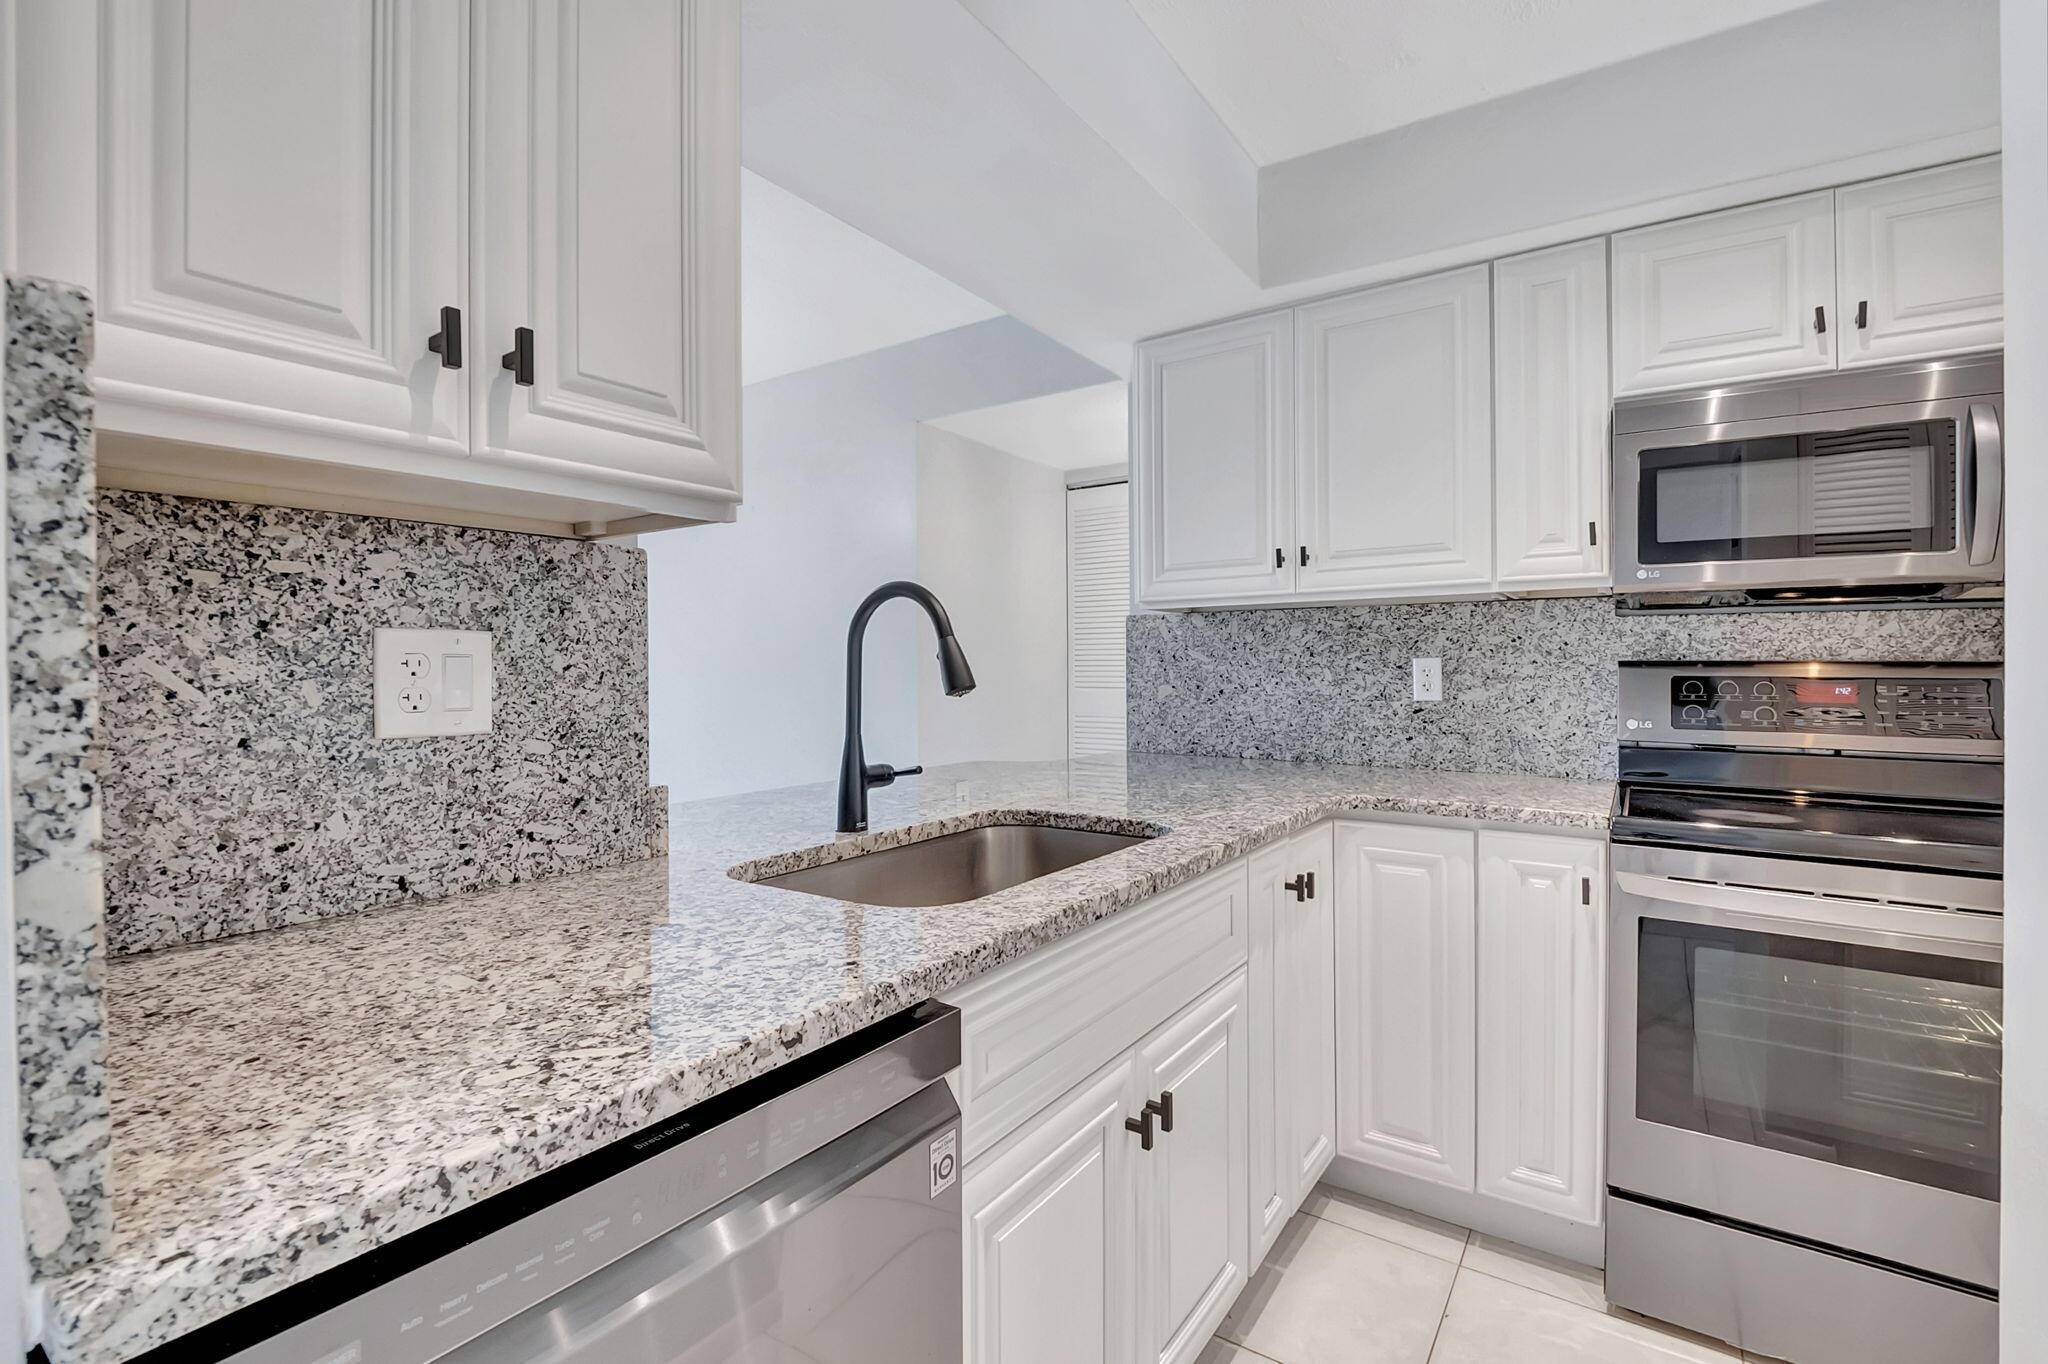 The kitchen has been UPDATED and the private screened balcony features a beautiful LAKE VIEW.